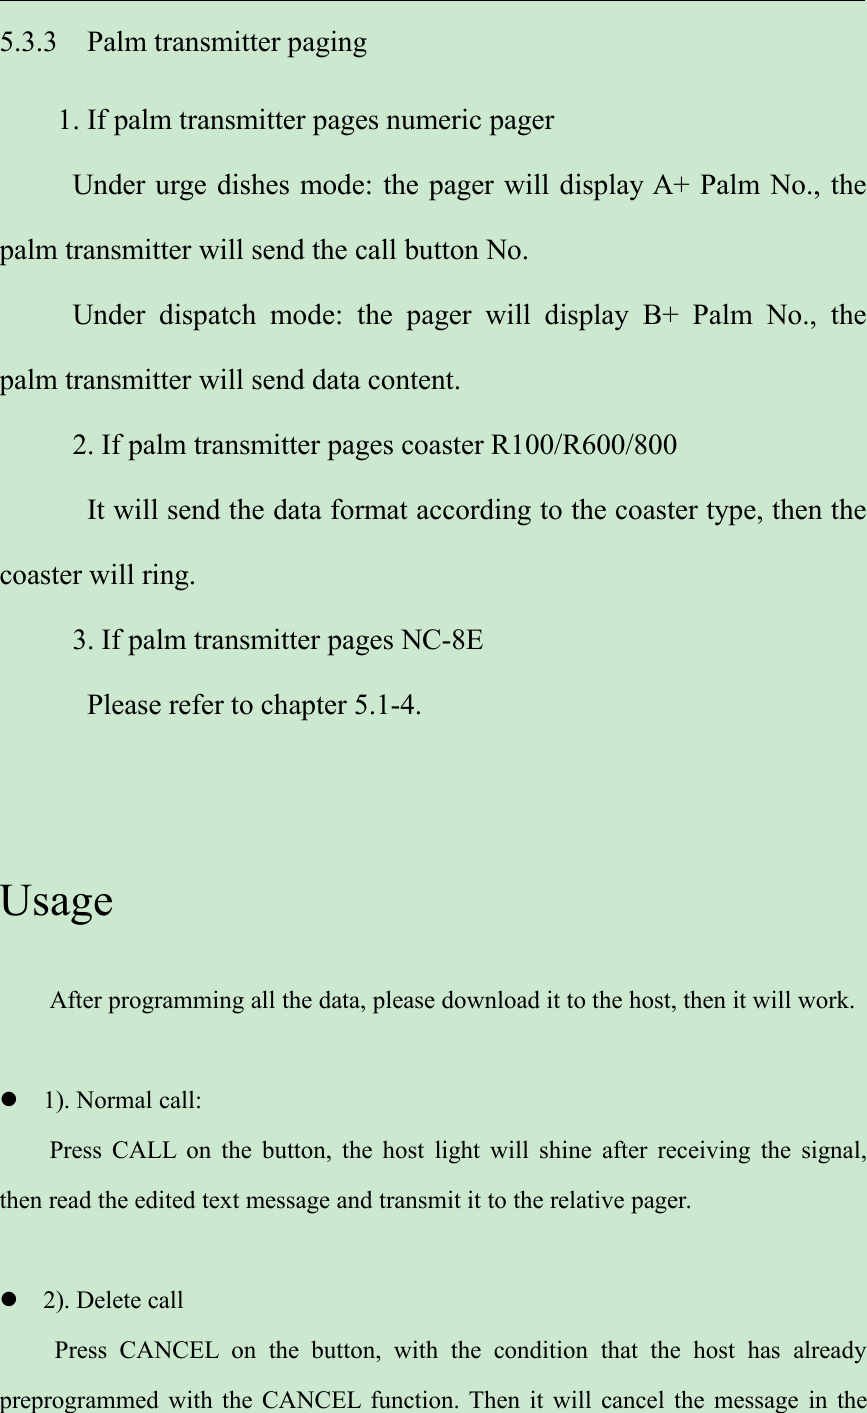 5.3.3 Palm transmitter paging1. If palm transmitter pages numeric pagerUnder urge dishes mode: the pager will display A+ Palm No., thepalm transmitter will send the call button No.Under dispatch mode: the pager will display B+ Palm No., thepalm transmitter will send data content.2. If palm transmitter pages coaster R100/R600/800It will send the data format according to the coaster type, then thecoaster will ring.3. If palm transmitter pages NC-8EPlease refer to chapter 5.1-4.UsageAfter programming all the data, please download it to the host, then it will work.1). Normal call:Press CALL on the button, the host light will shine after receiving the signal,then read the edited text message and transmit it to the relative pager.2). Delete callPress CANCEL on the button, with the condition that the host has alreadypreprogrammed with the CANCEL function. Then it will cancel the message in the